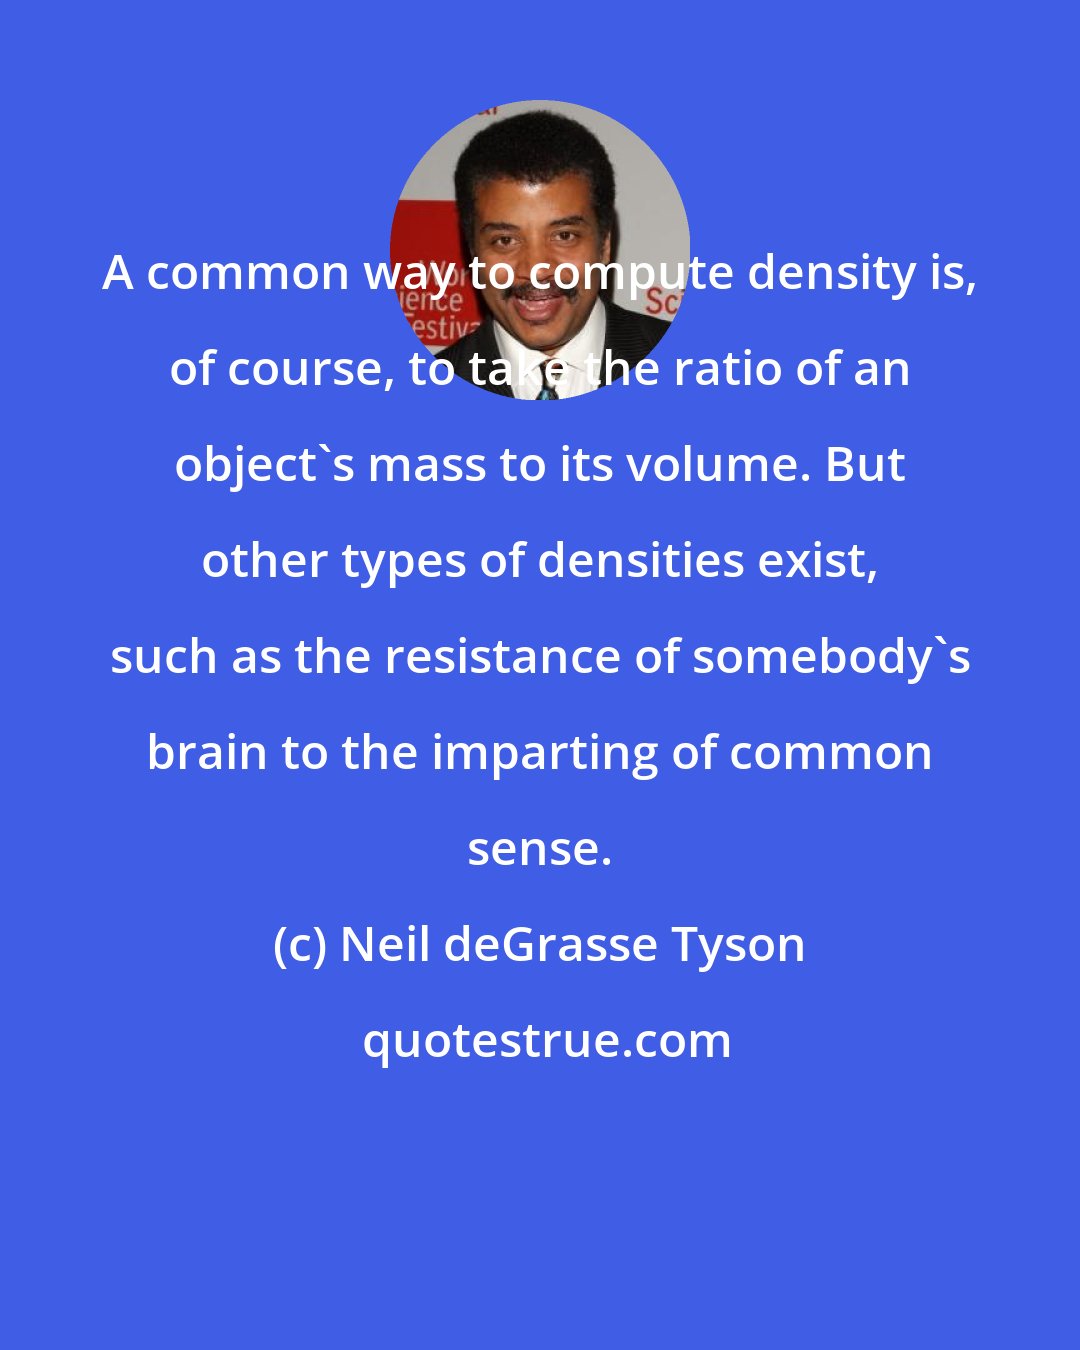 Neil deGrasse Tyson: A common way to compute density is, of course, to take the ratio of an object's mass to its volume. But other types of densities exist, such as the resistance of somebody's brain to the imparting of common sense.